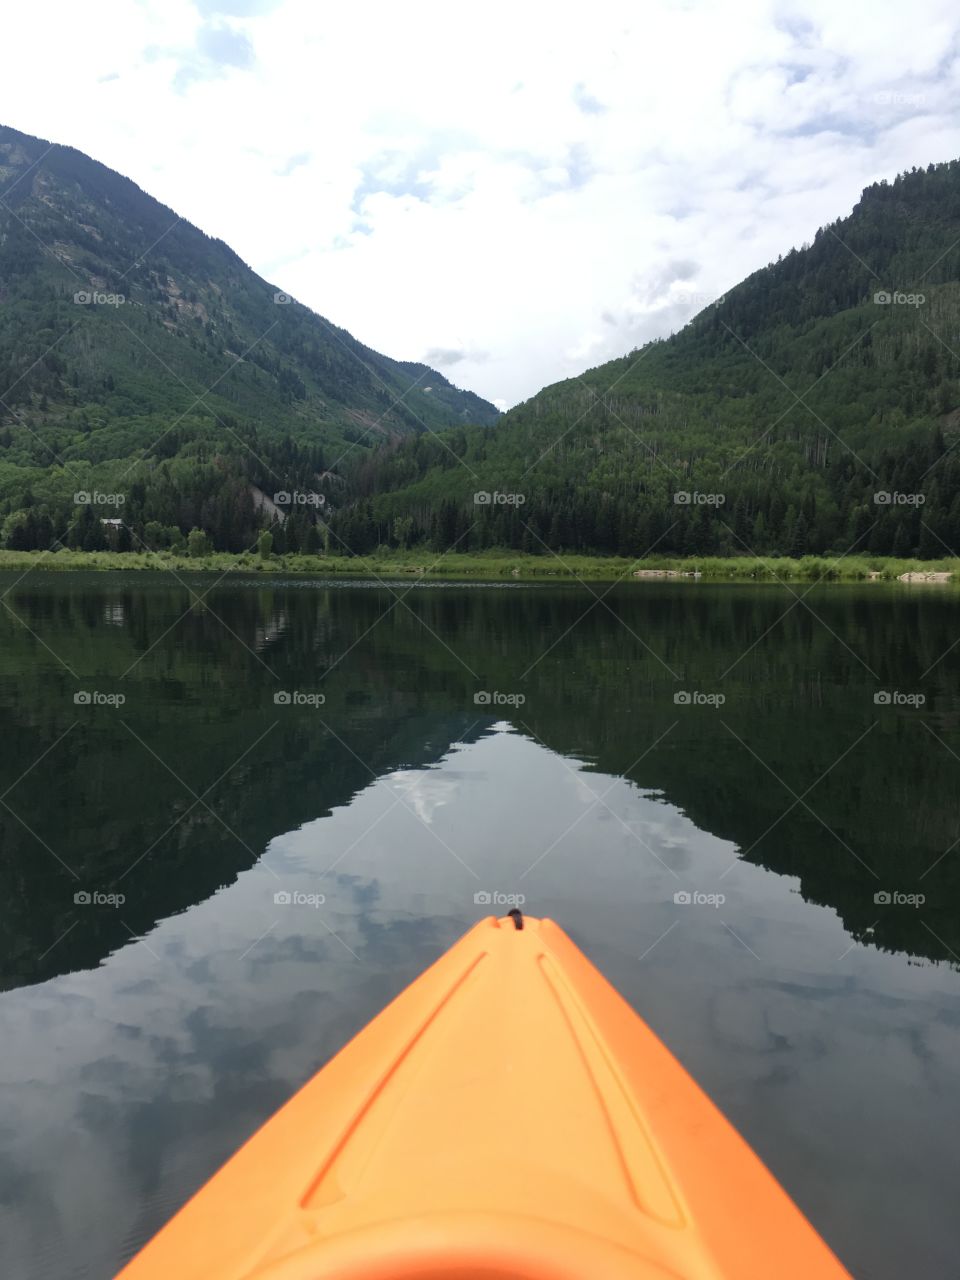 Kayaking on a clear alpine lake in the Rocky Mountains if Colorado. 